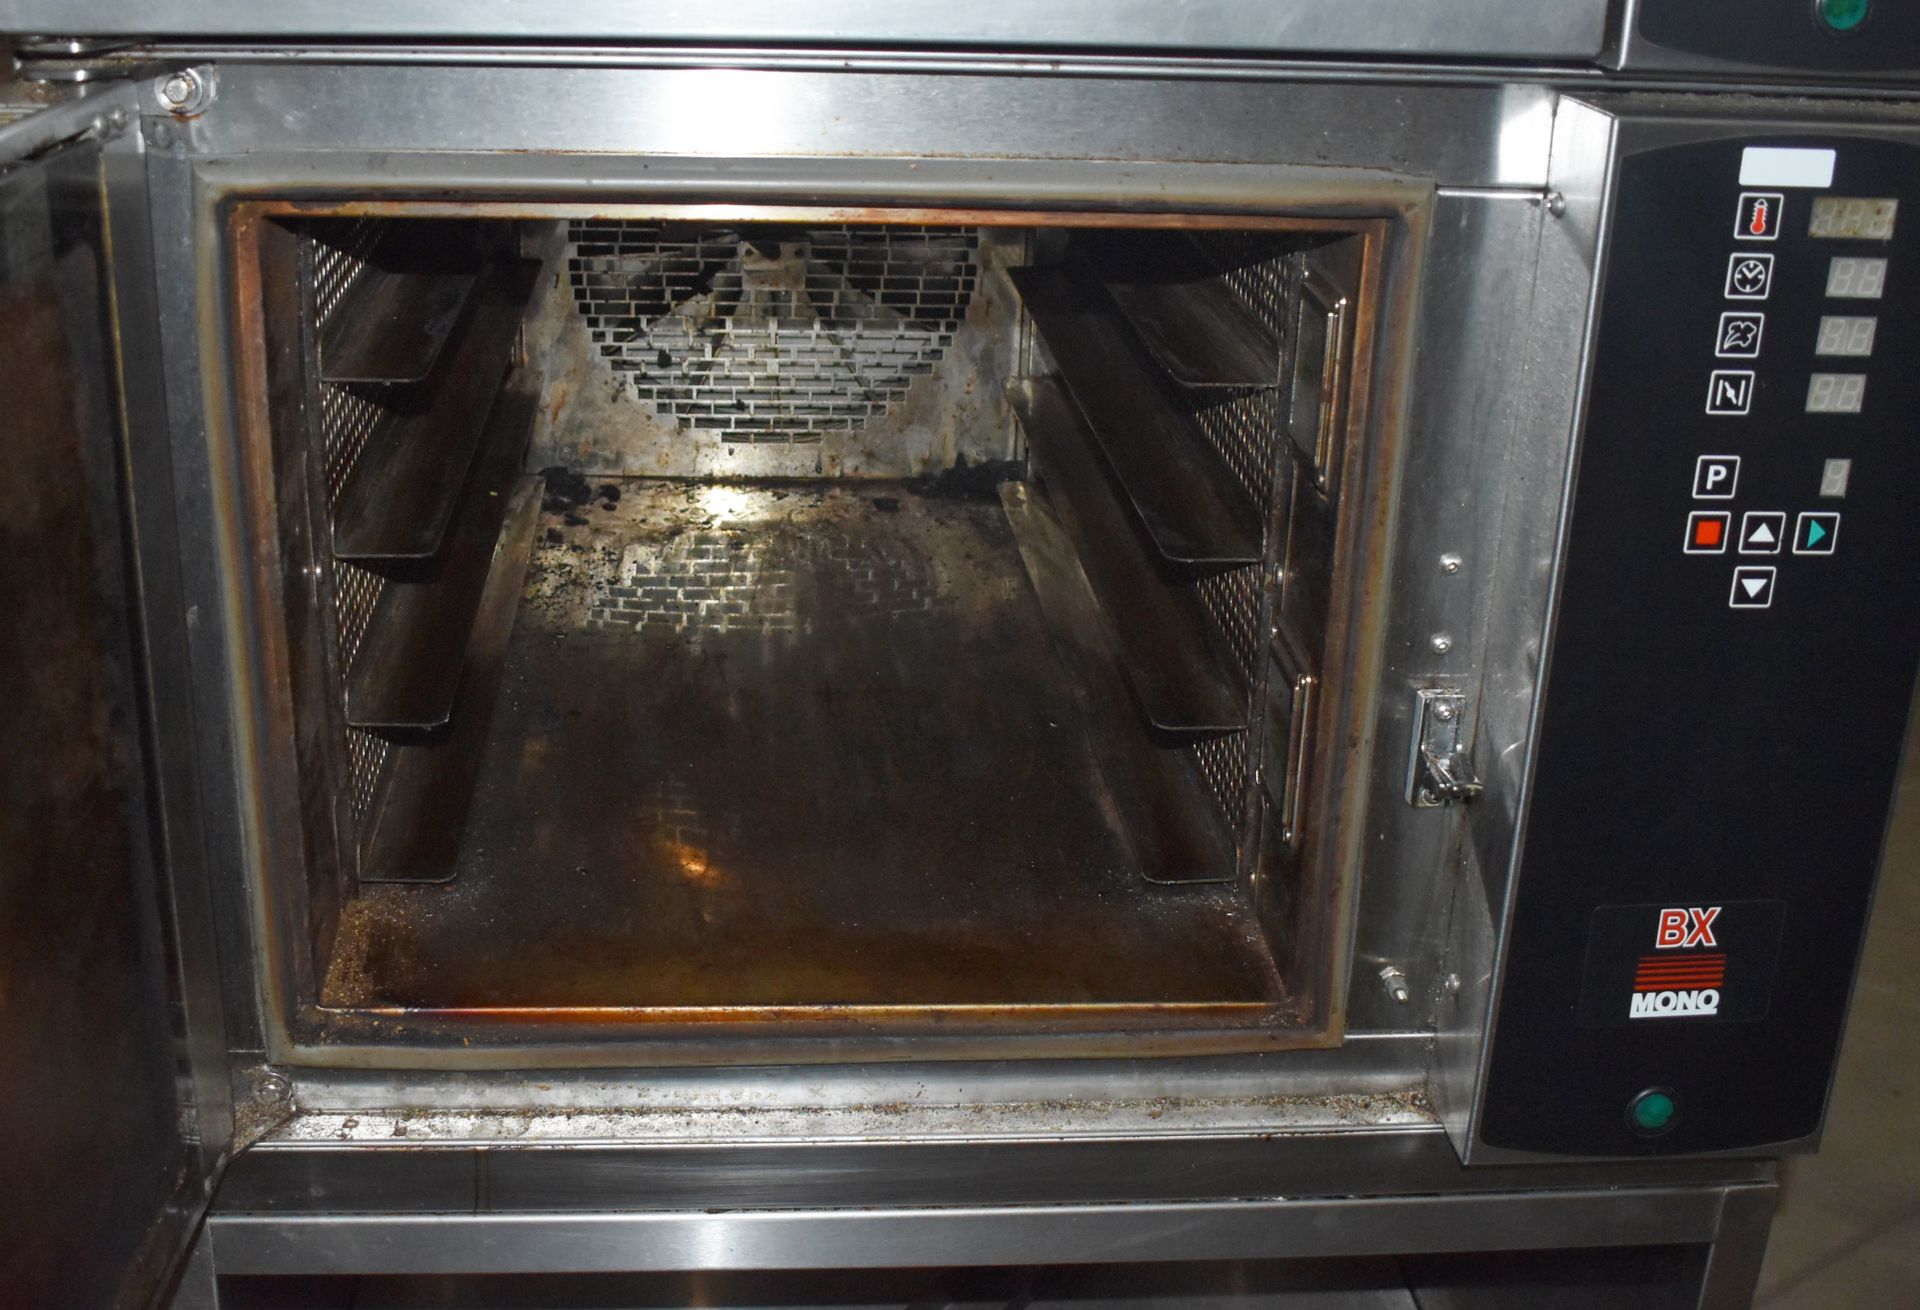 1 x Mono Double Classic and Steam BX Convection Oven - Model FG159C - 3 Phase Power - H210 x W83 x - Image 8 of 15